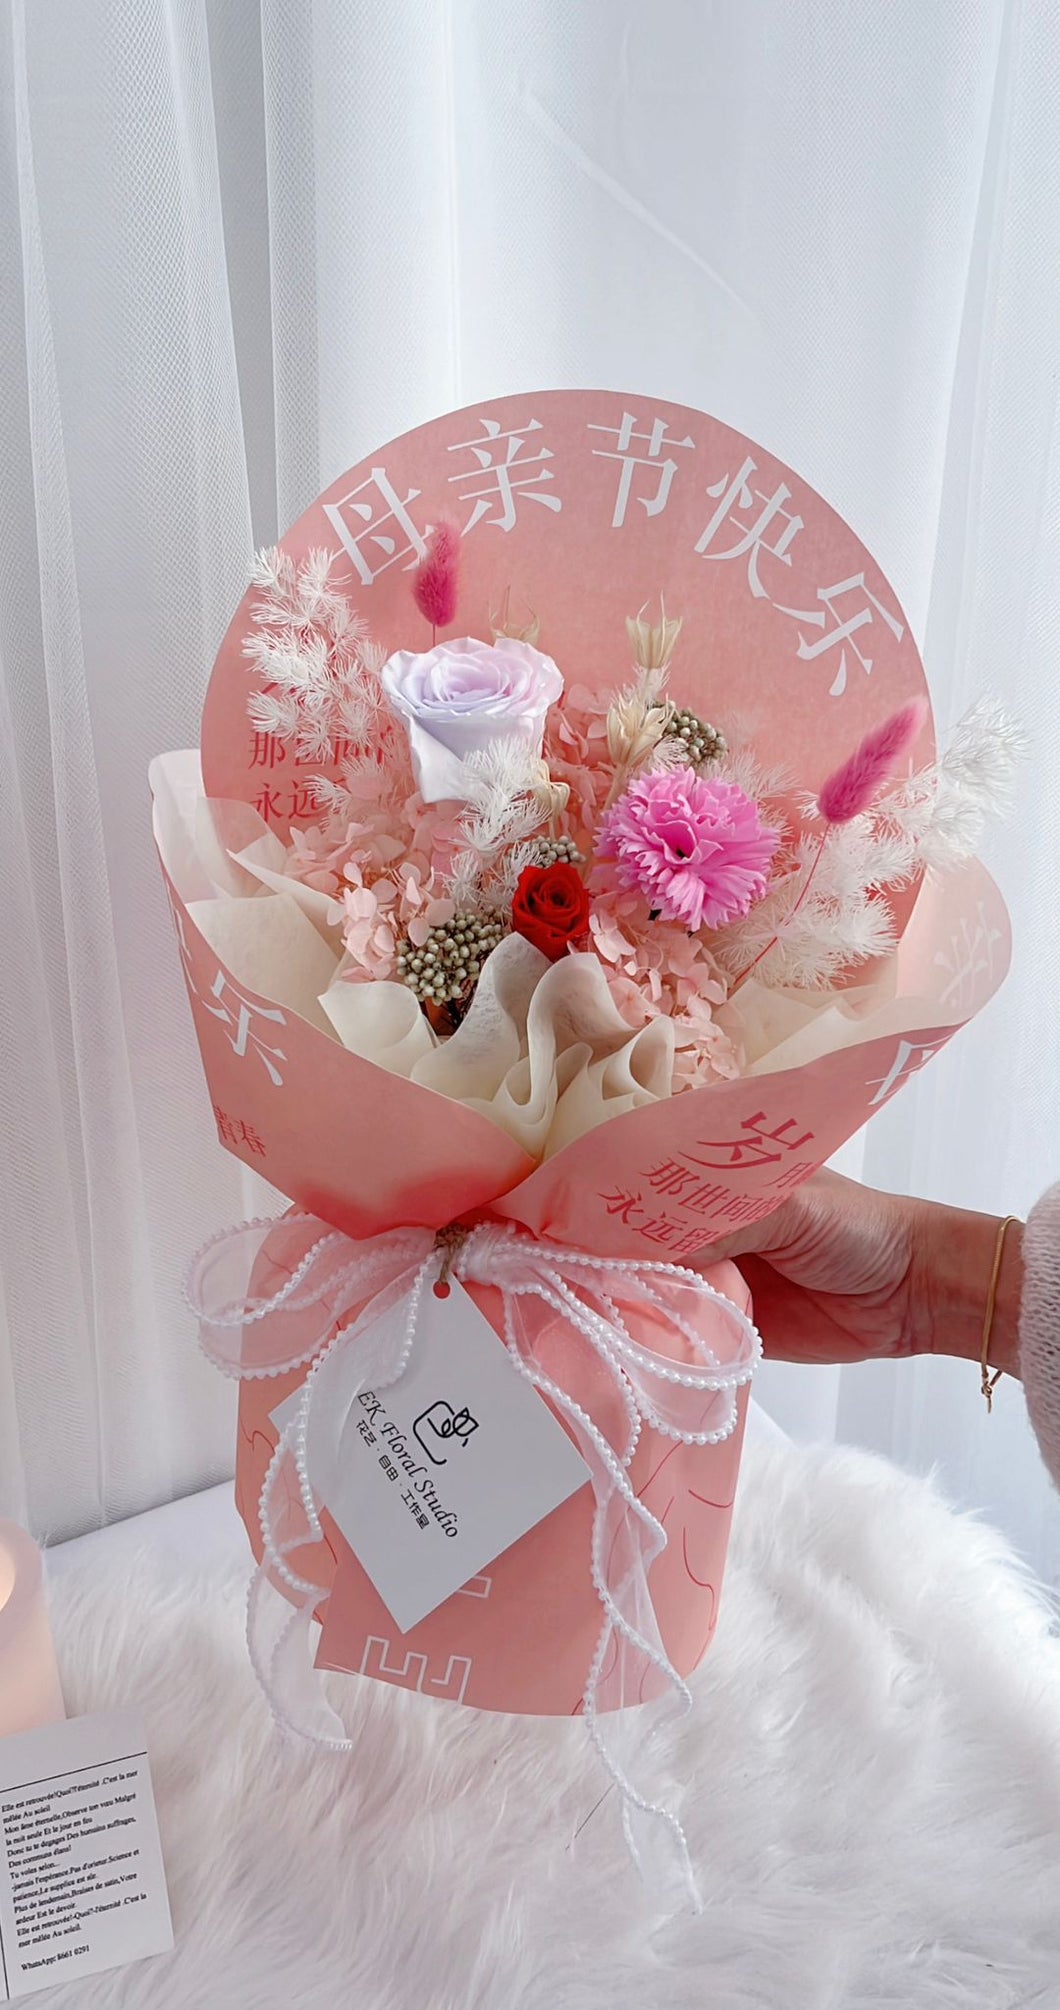 Mothers' Day Carnation Everlasting Bouquet with Pink Tone 母亲节粉色系永生花康乃馨花束